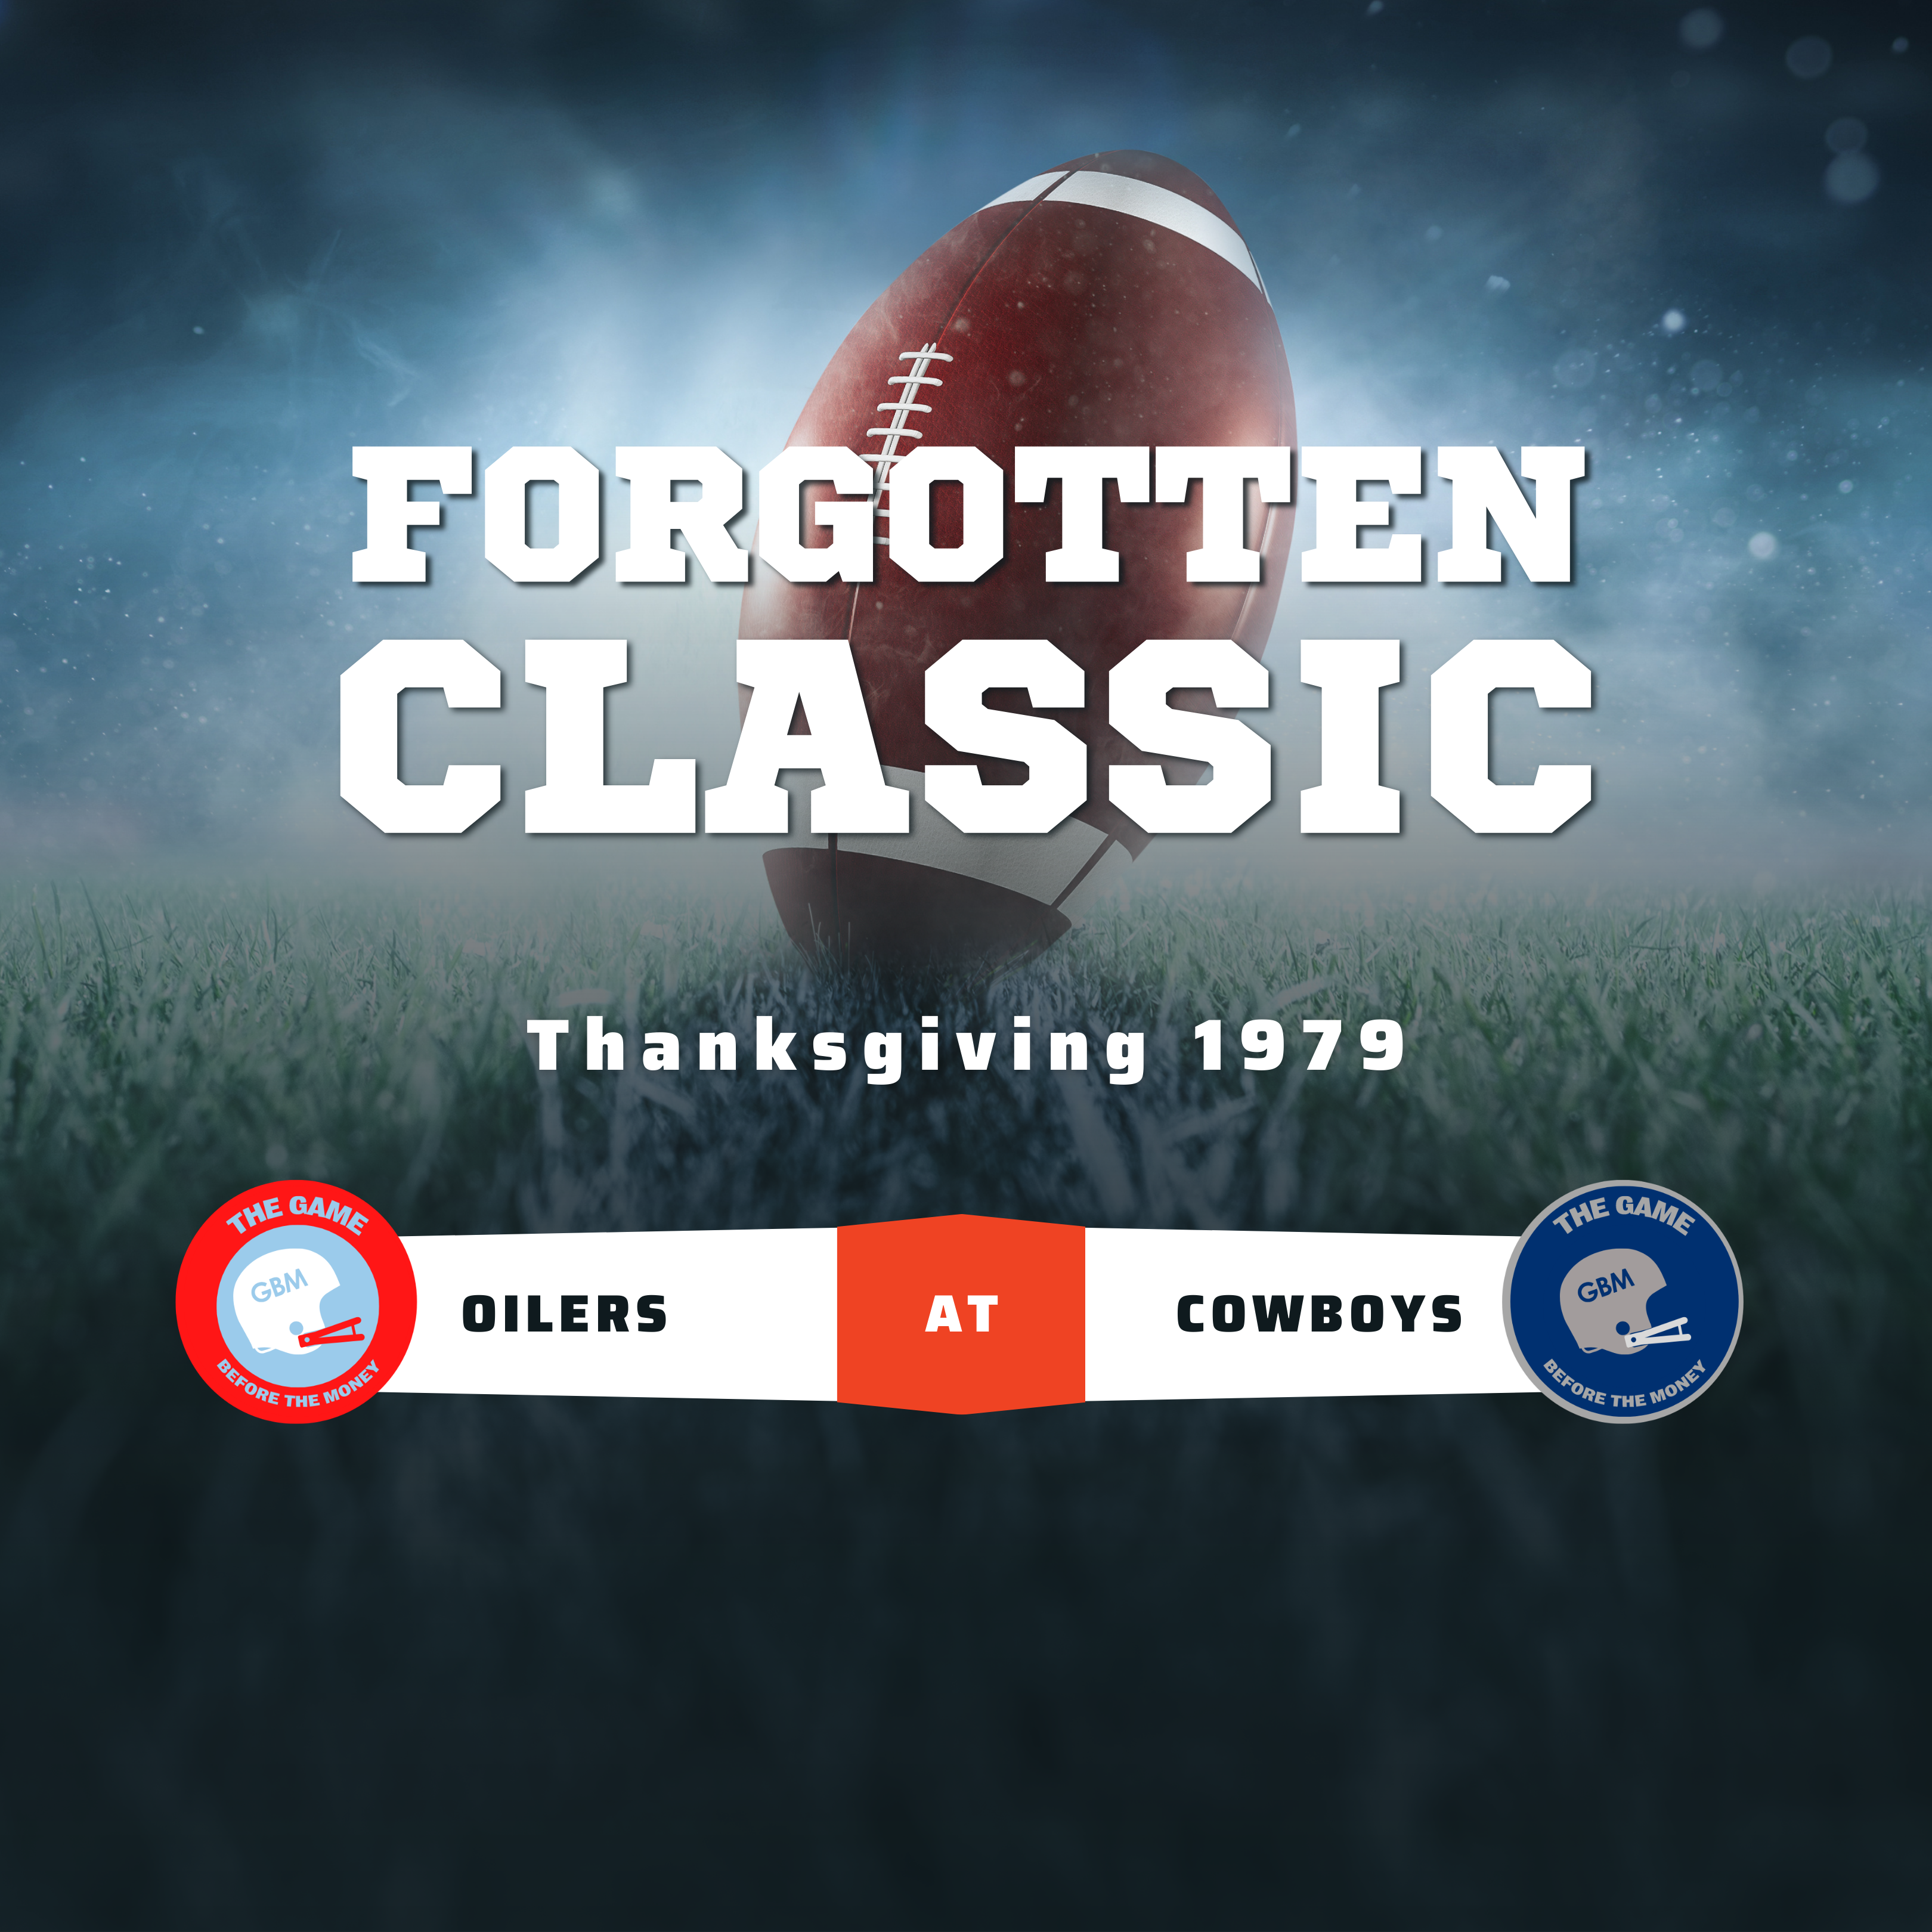 the cowboys play on thanksgiving